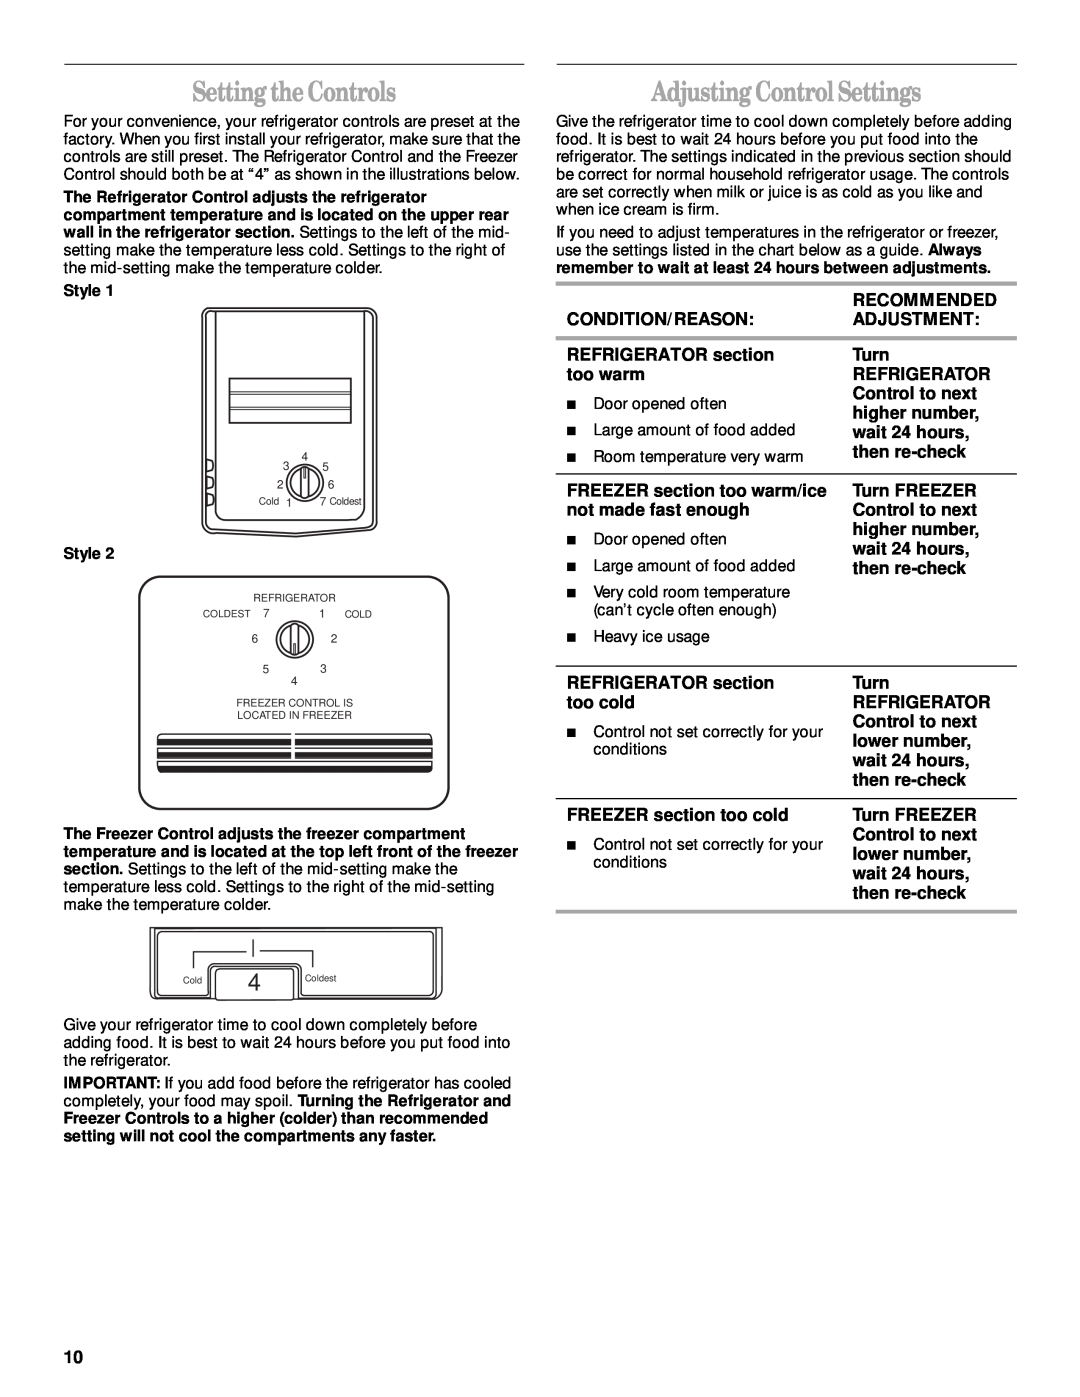 Whirlpool 2300253 manual Setting the Controls, Adjusting Control Settings, Recommended, Condition/Reason, Adjustment, Turn 